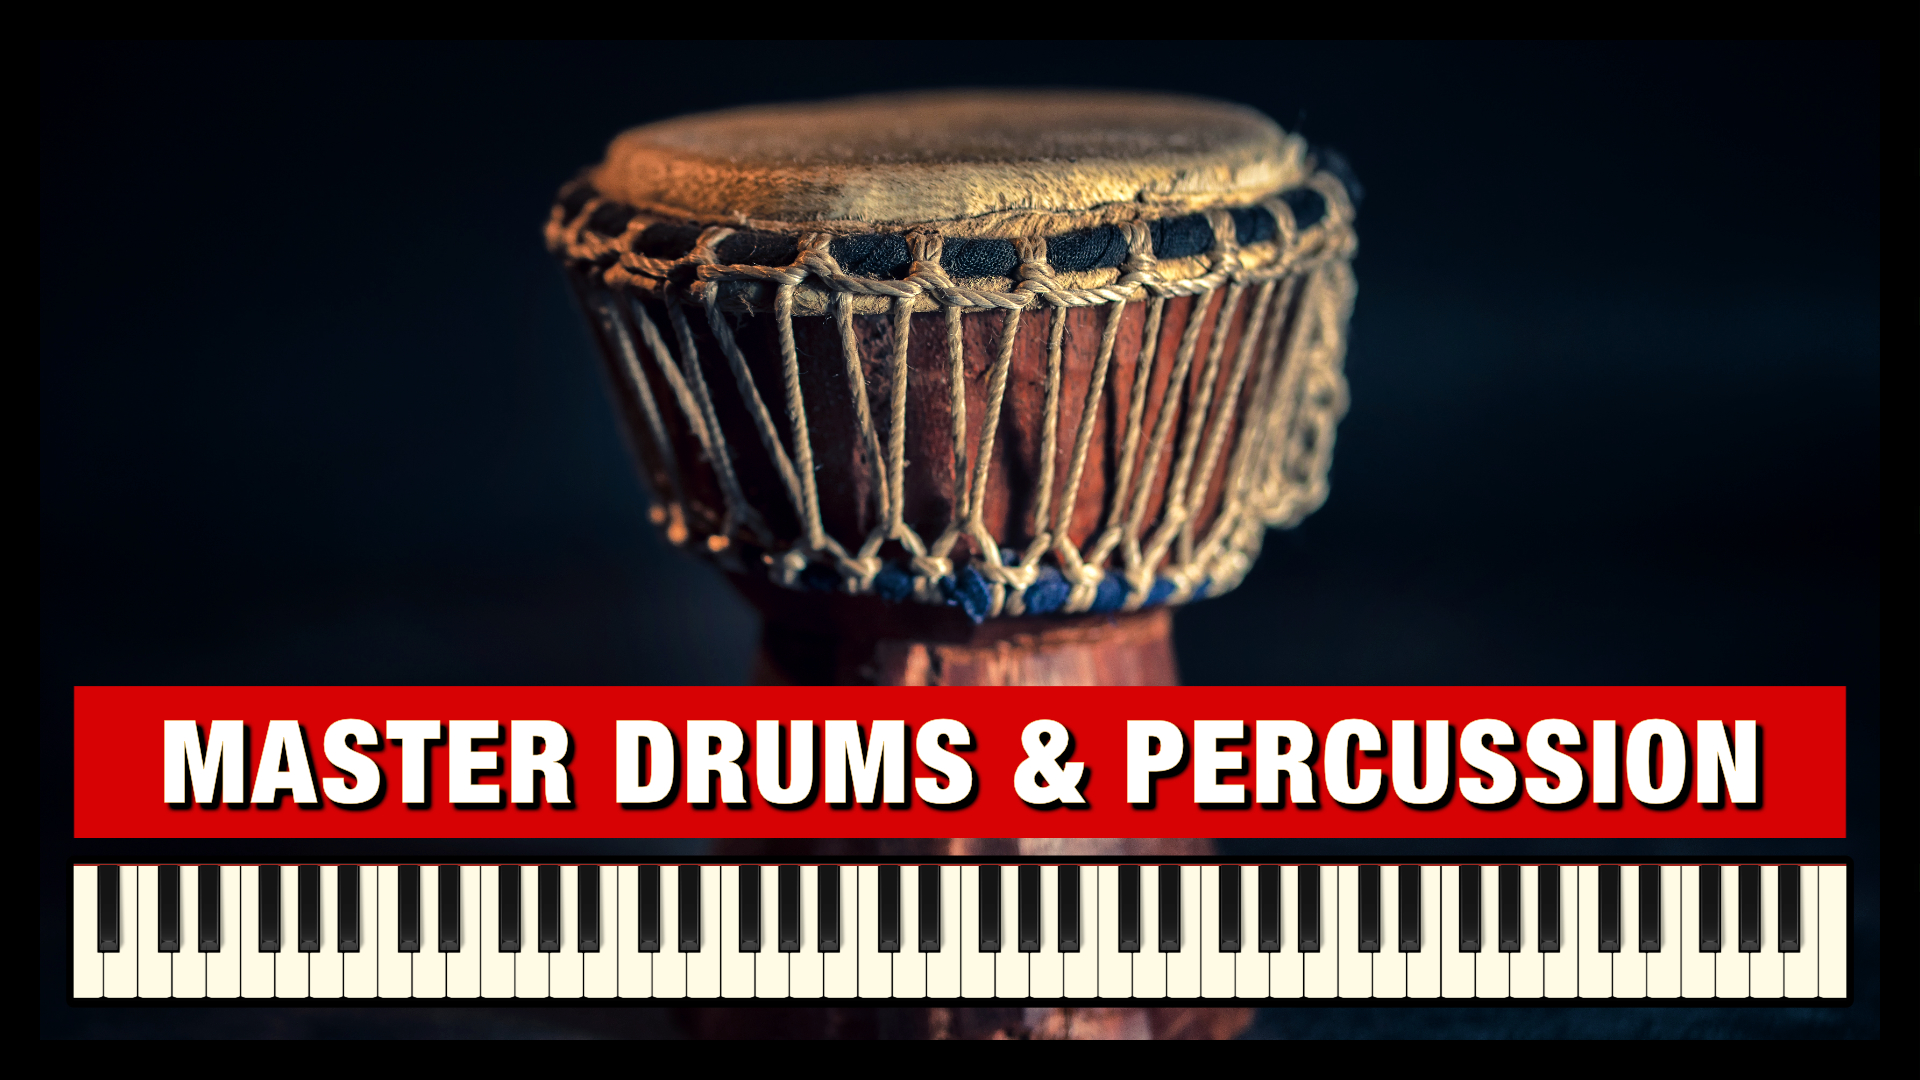 Music Composition Course - Drums & Percussion